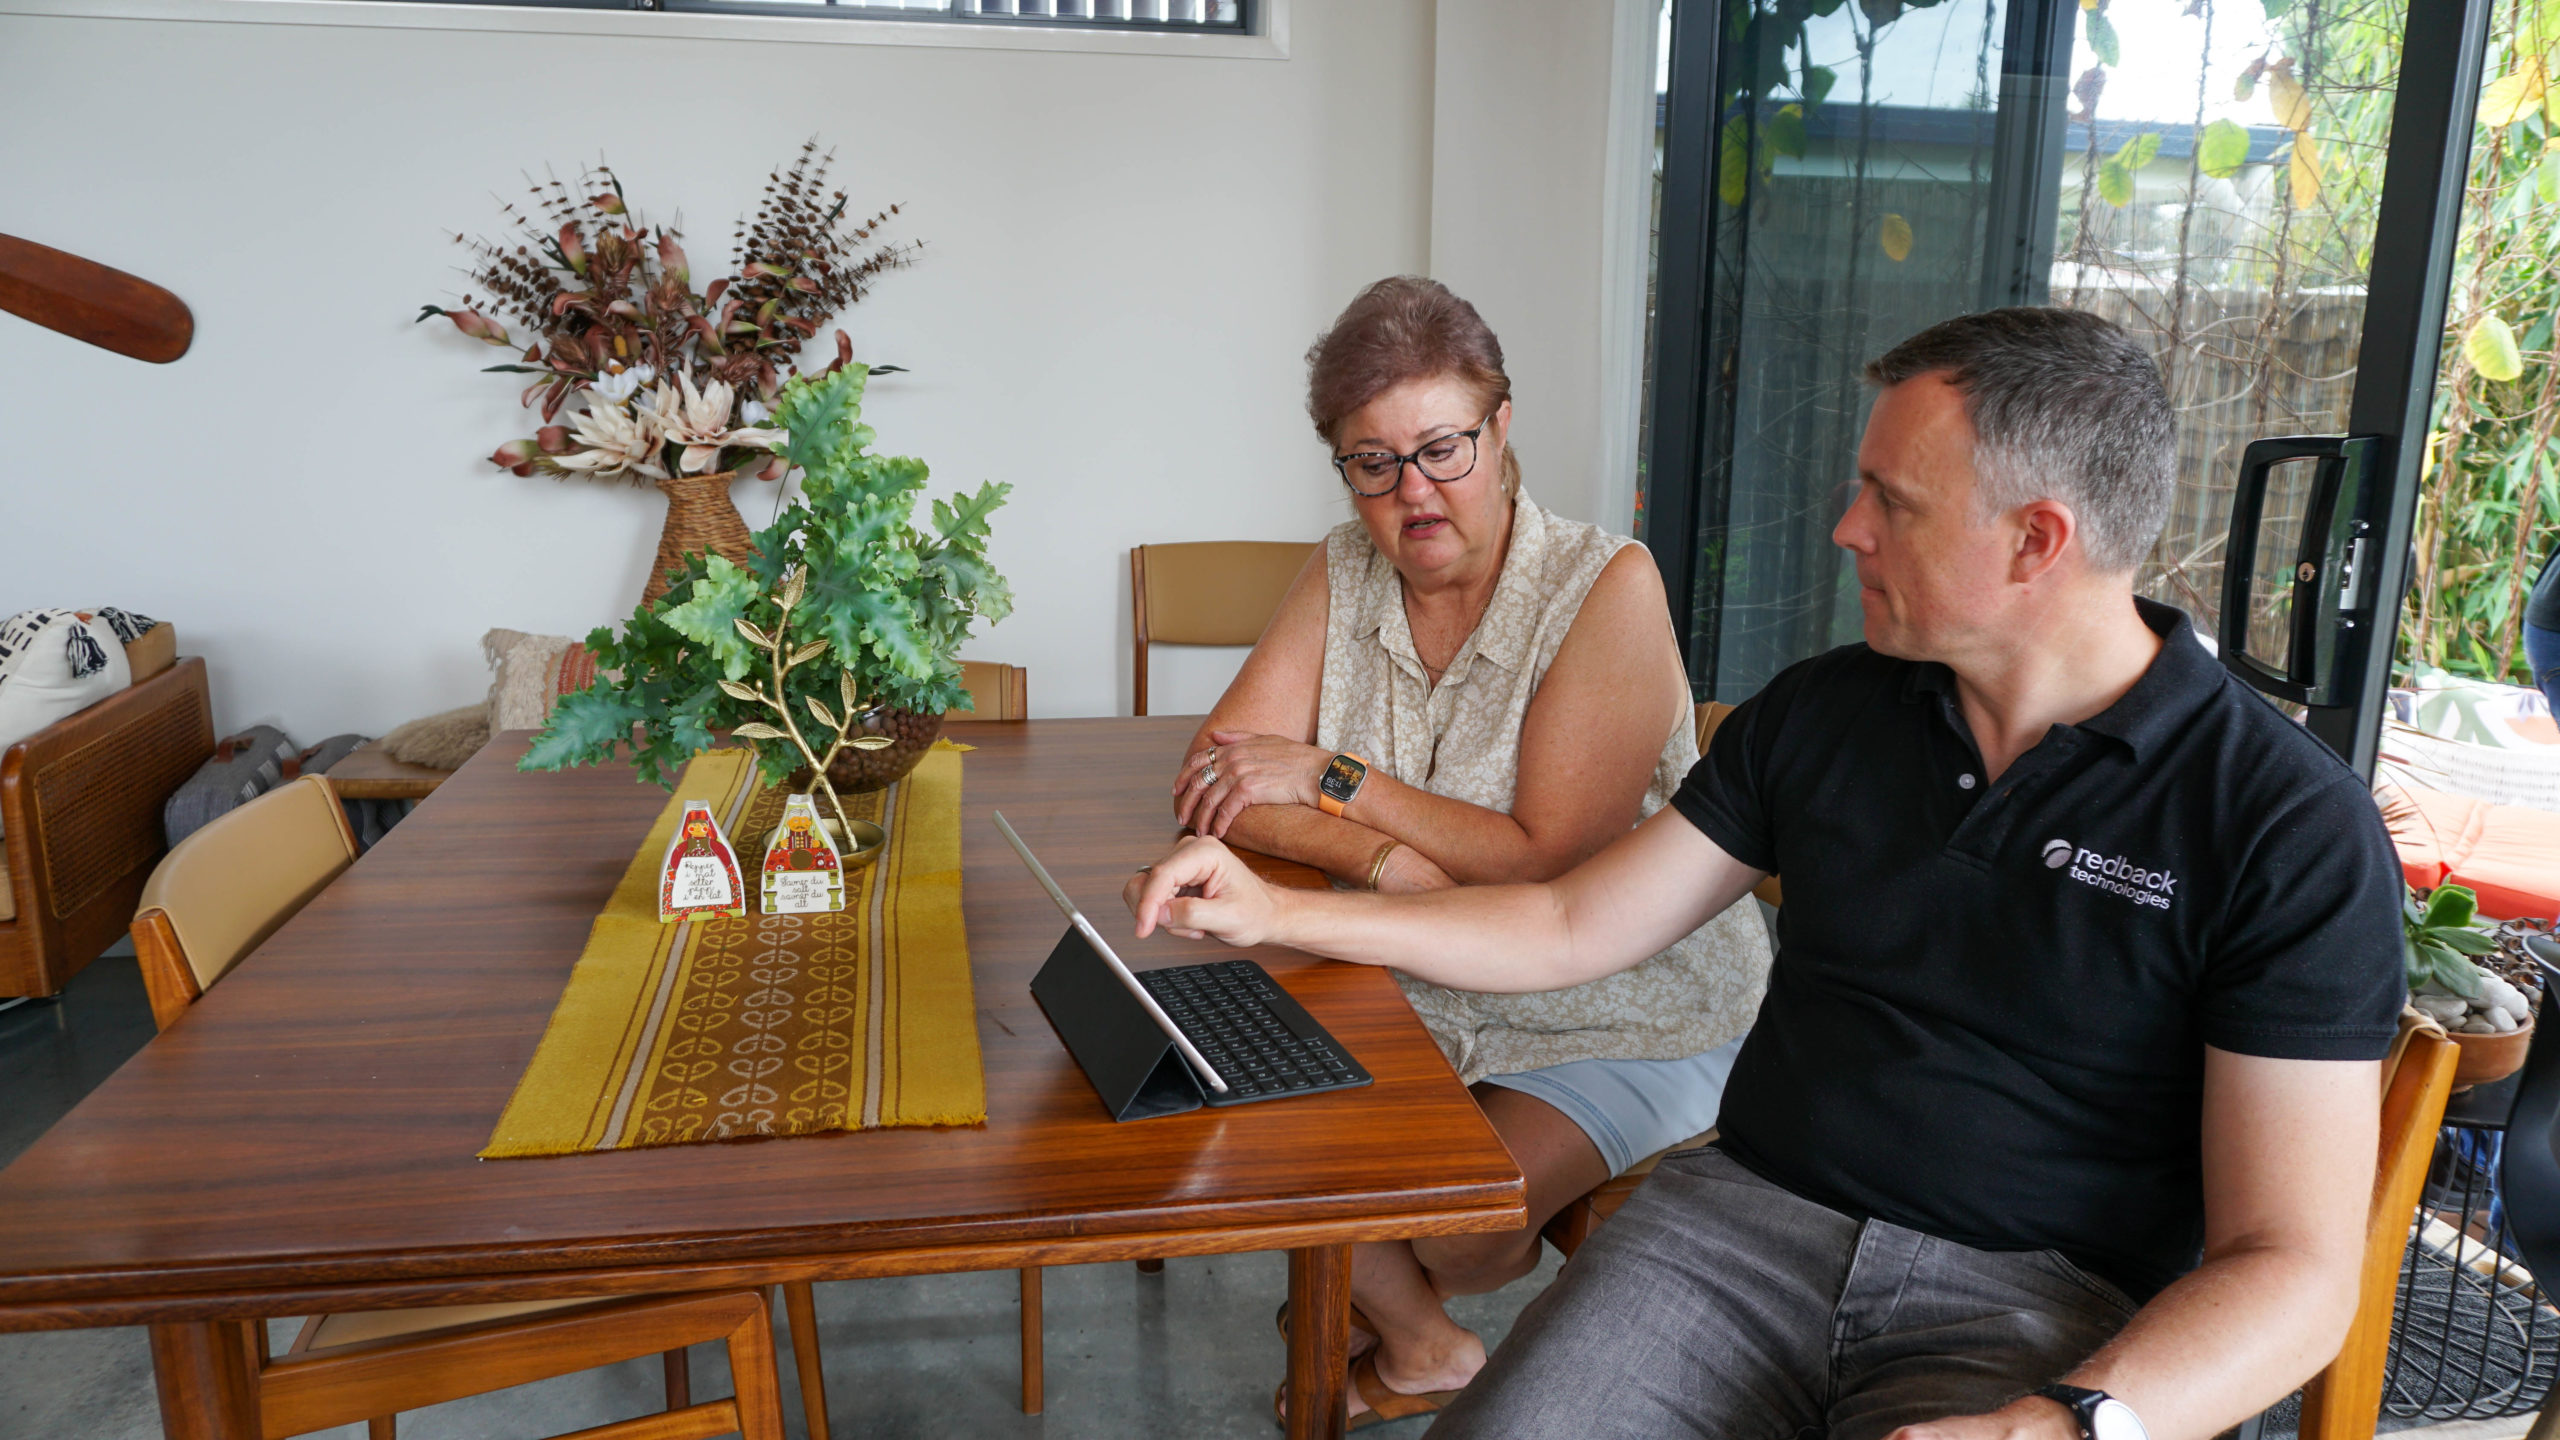 Redback's CEO Patrick Matweew discusses how Loretta's home is running at 99% sustainability.